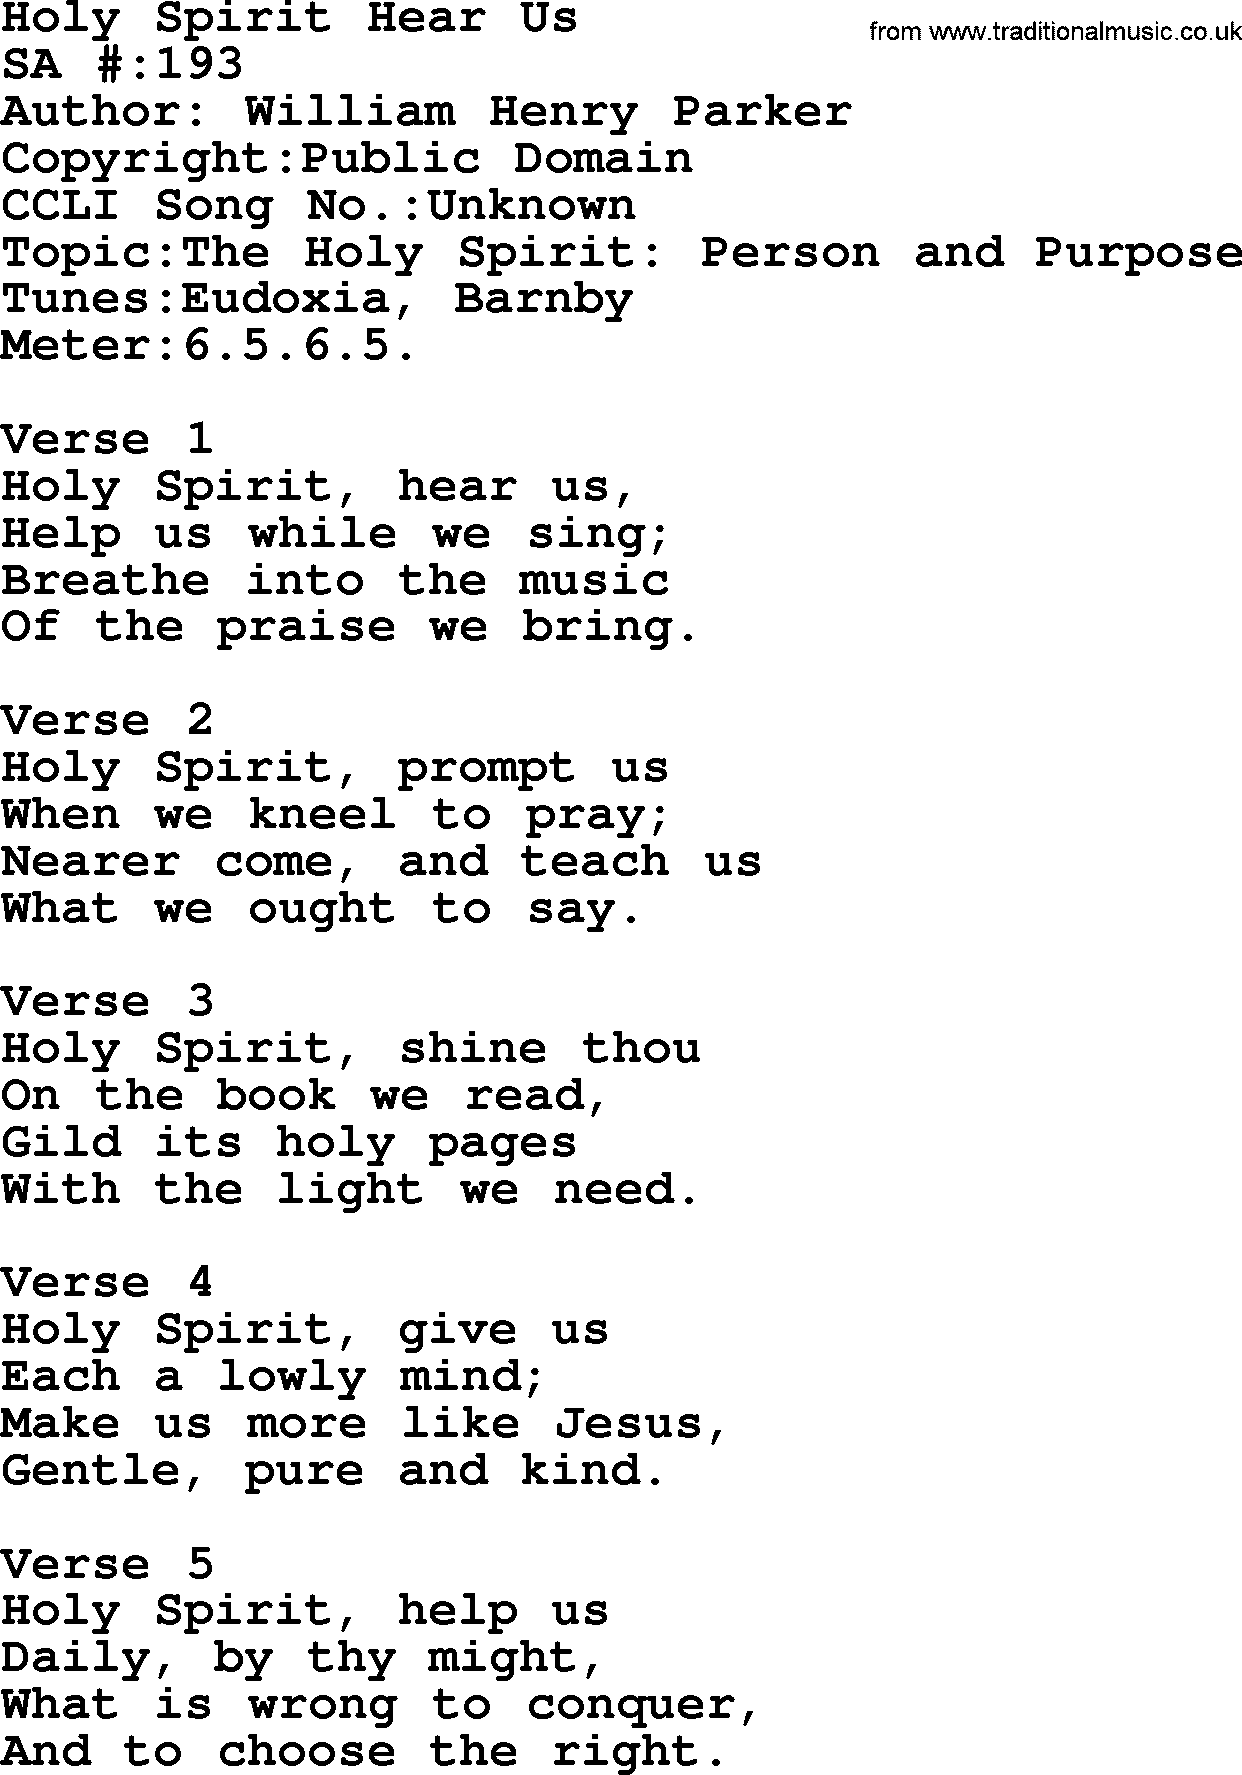 Salvation Army Hymnal, title: Holy Spirit Hear Us, with lyrics and PDF,